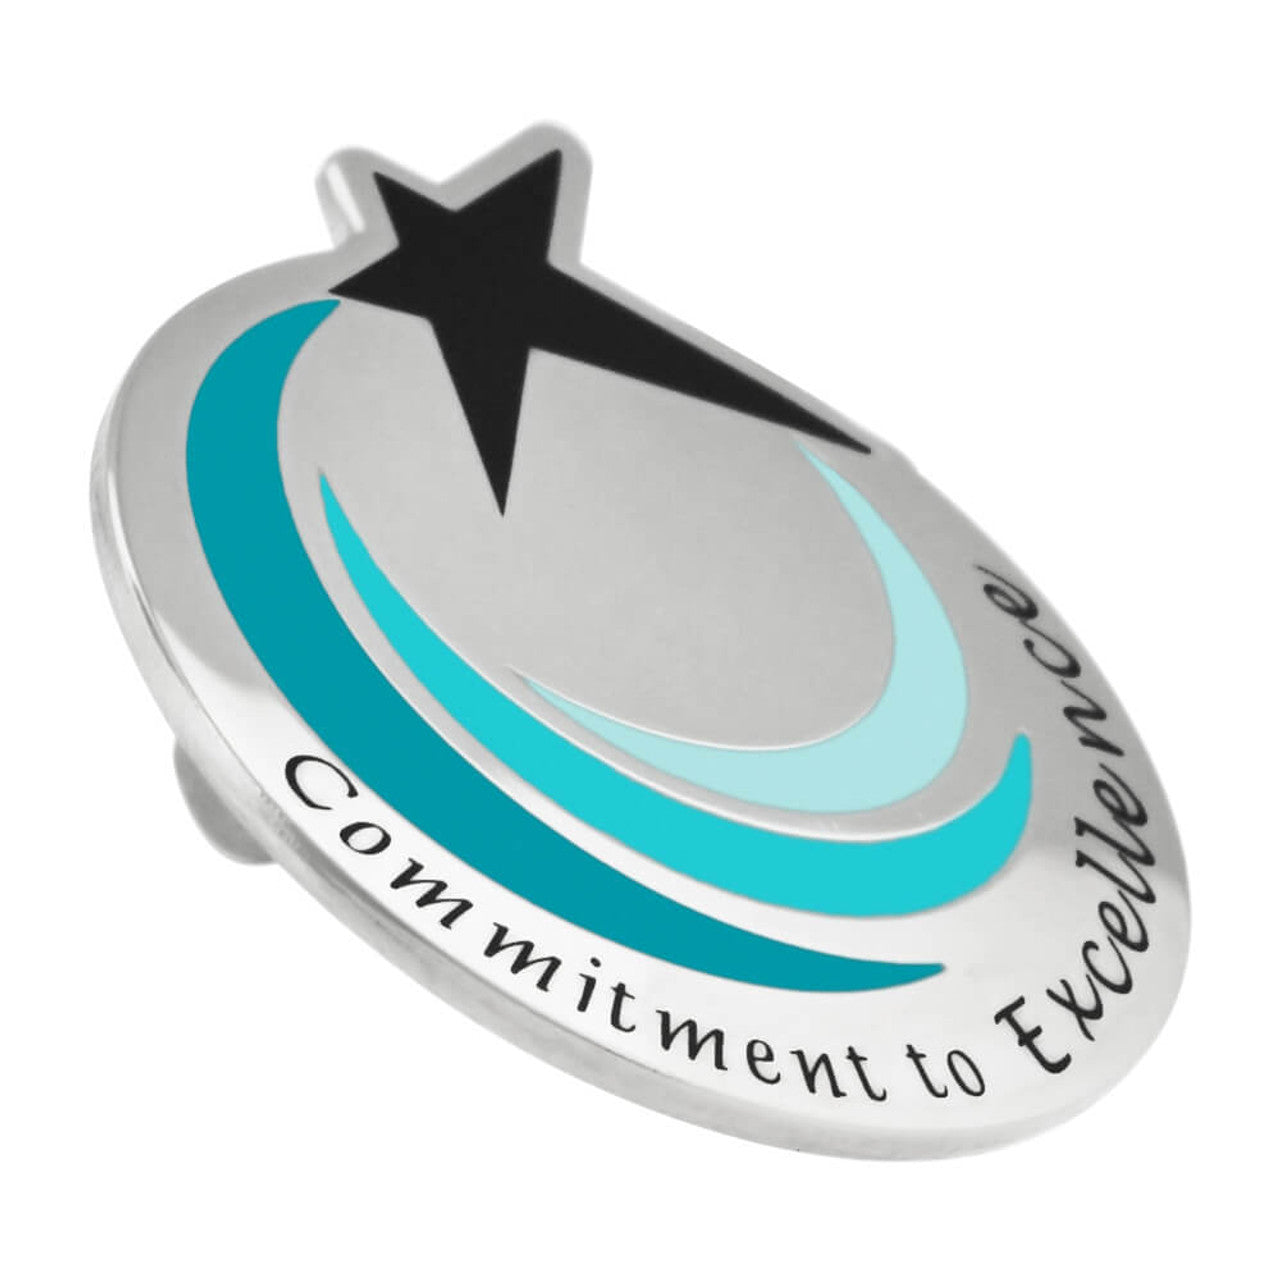 Commitment to Excellence Pin